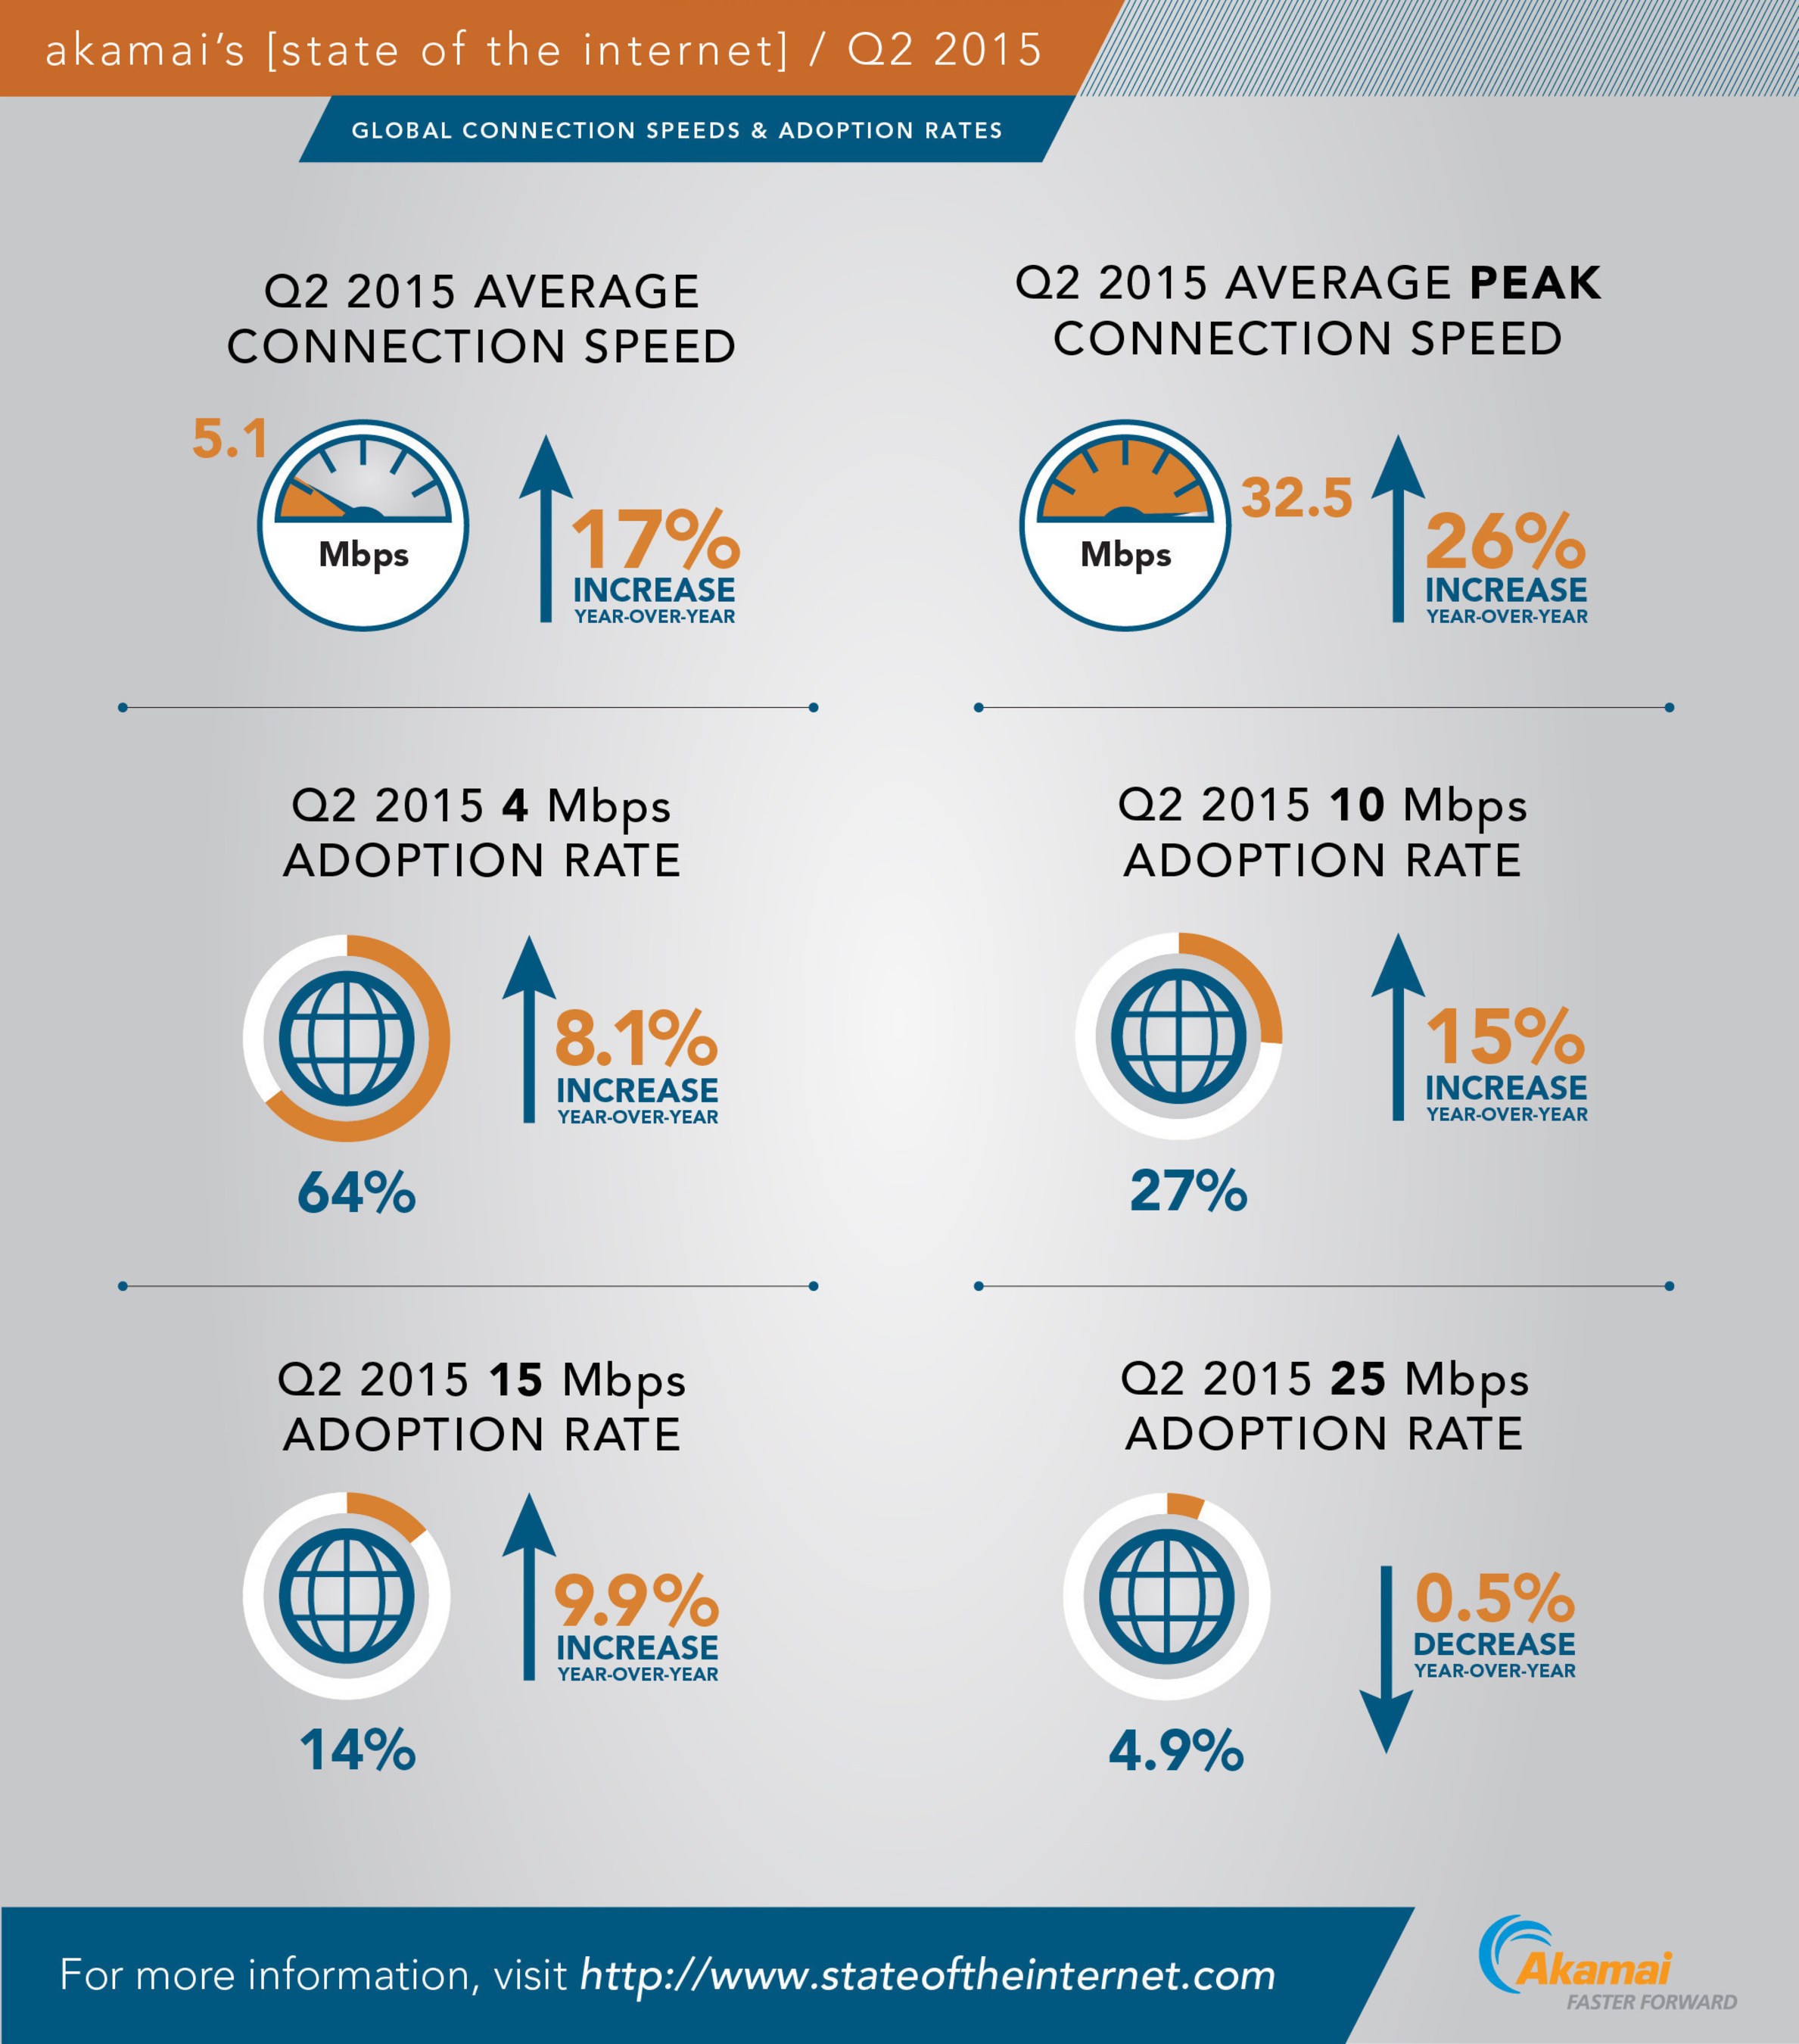 Akamai's 'Second Quarter, 2015 State of the Internet Report' includes metrics highlighting global Internet connection speeds and broadband adoption rates.